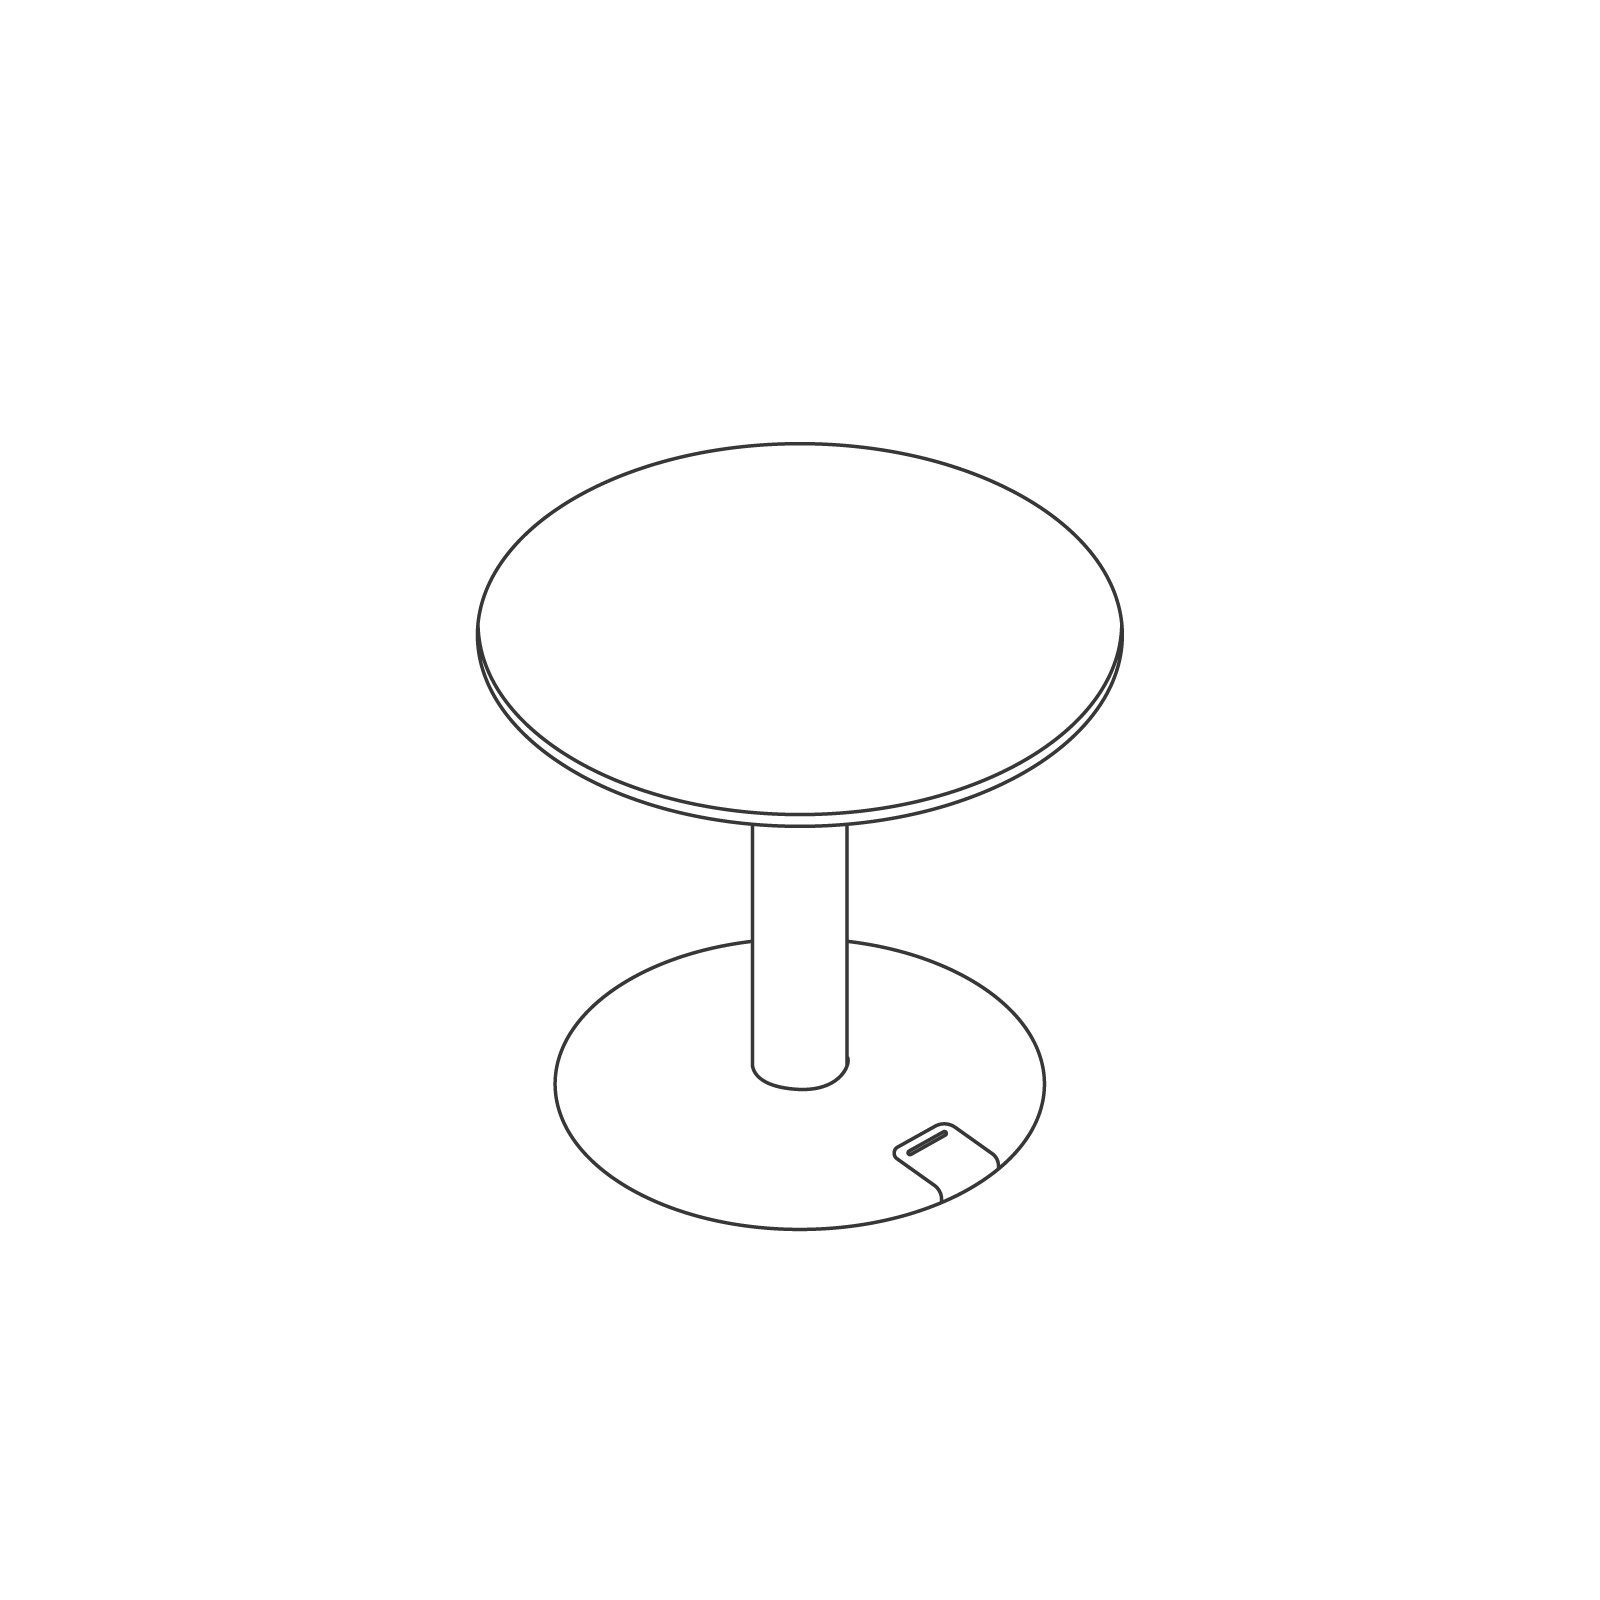 A line drawing - OE1 Sit-Stand Table – Round